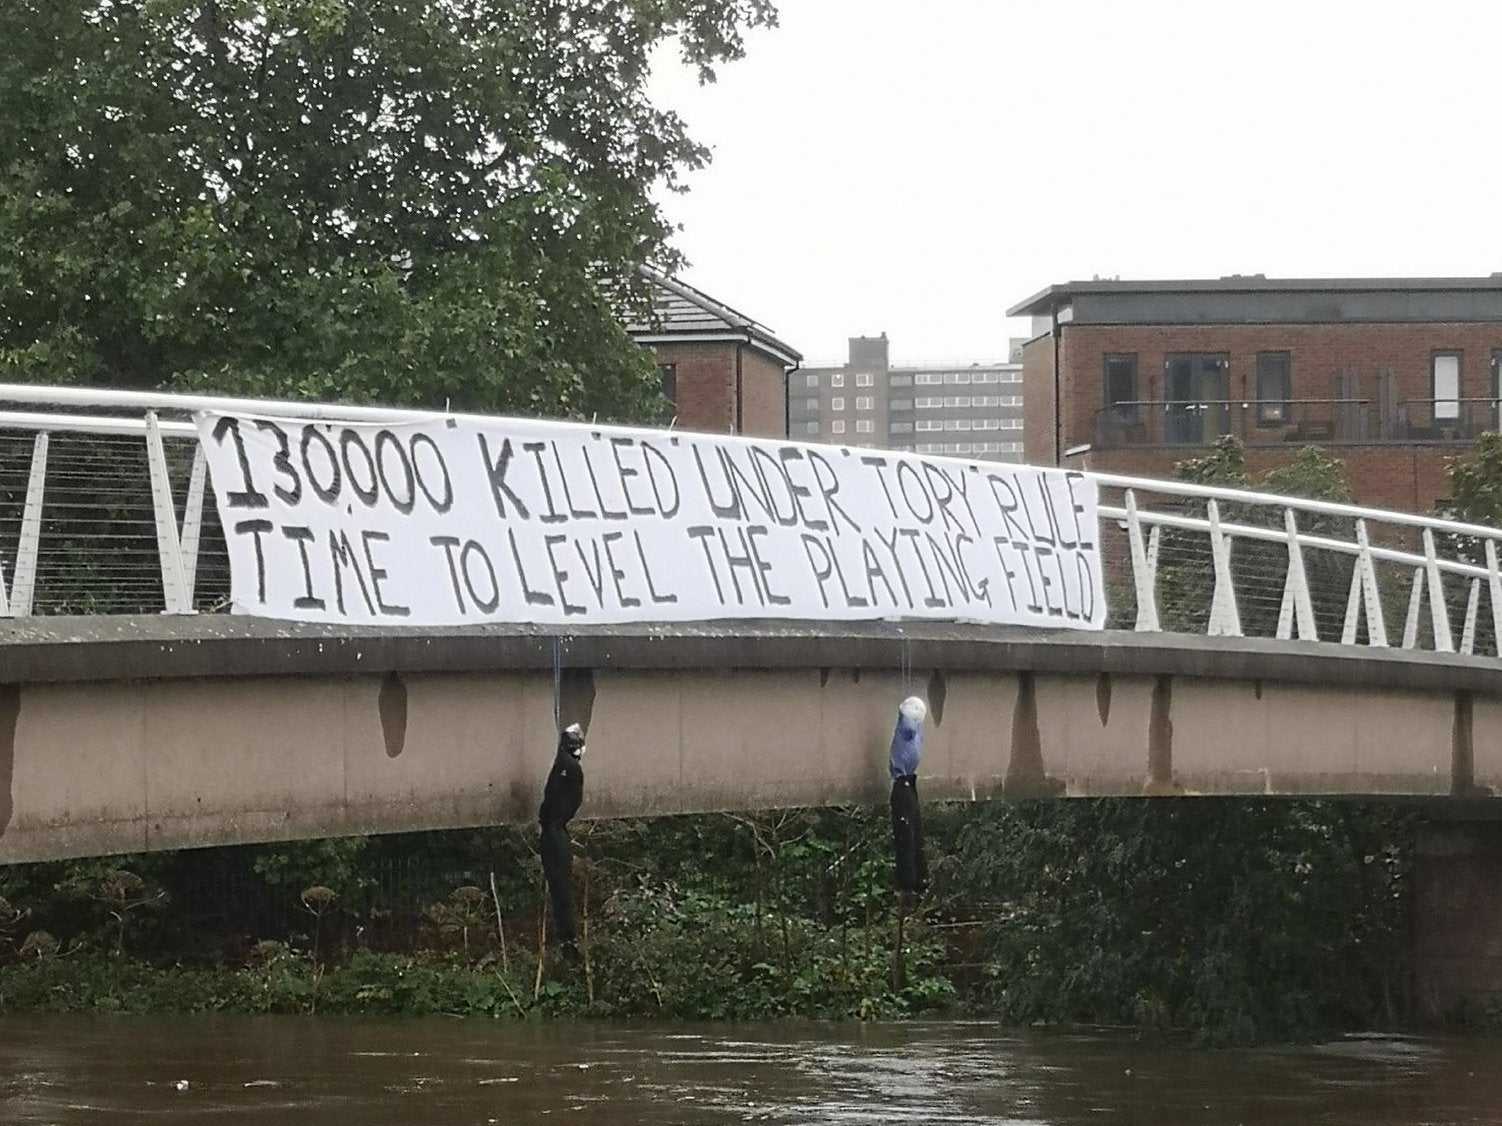 The banner was hung over the River Irwell